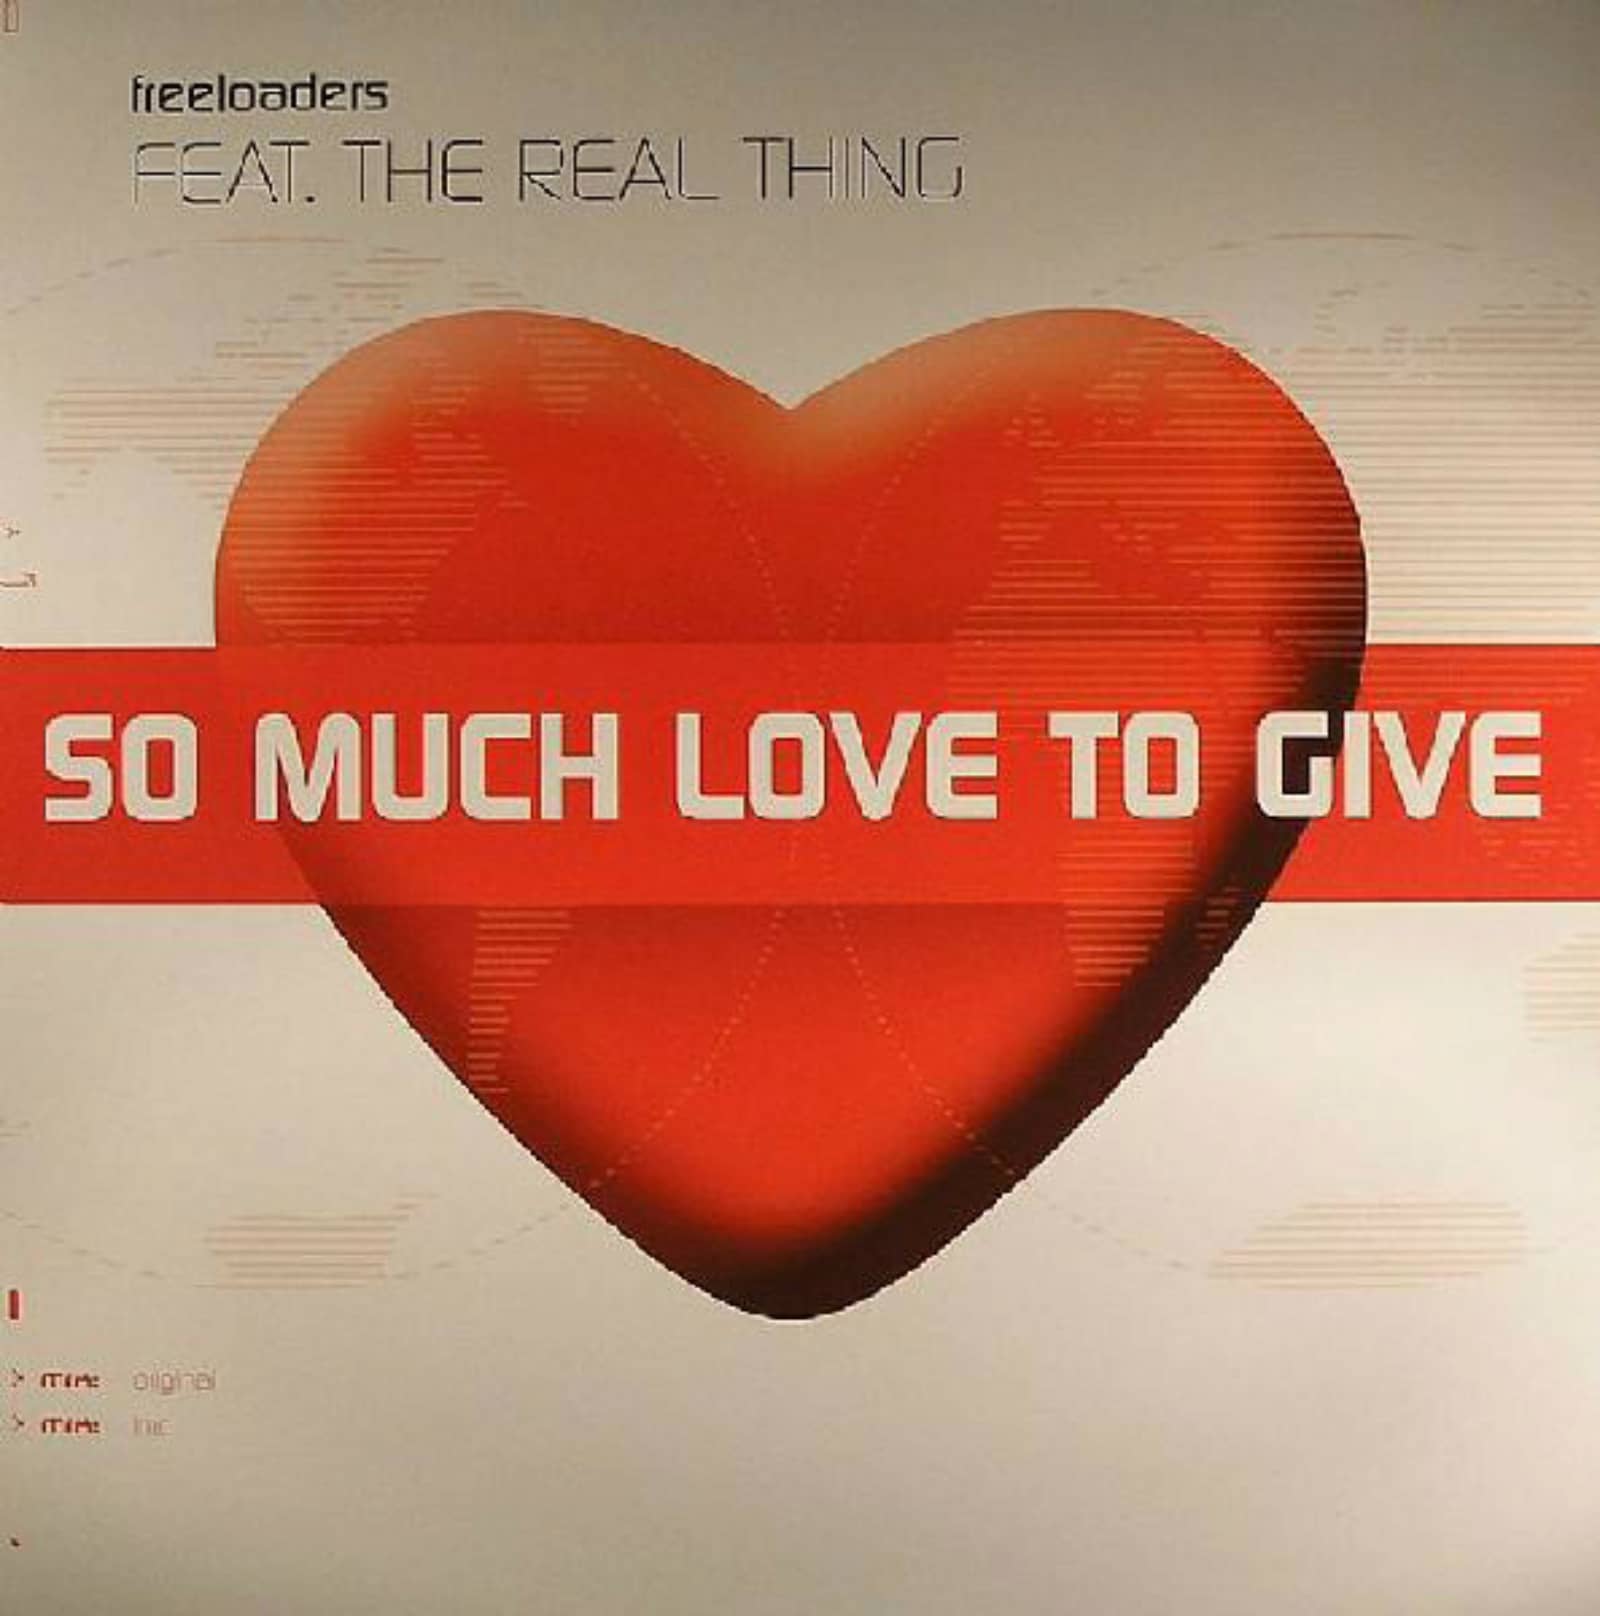 So good so much so love. Give Love give обложка. Freeloaders-so much Love to give. Give more Love. Freeloaders.